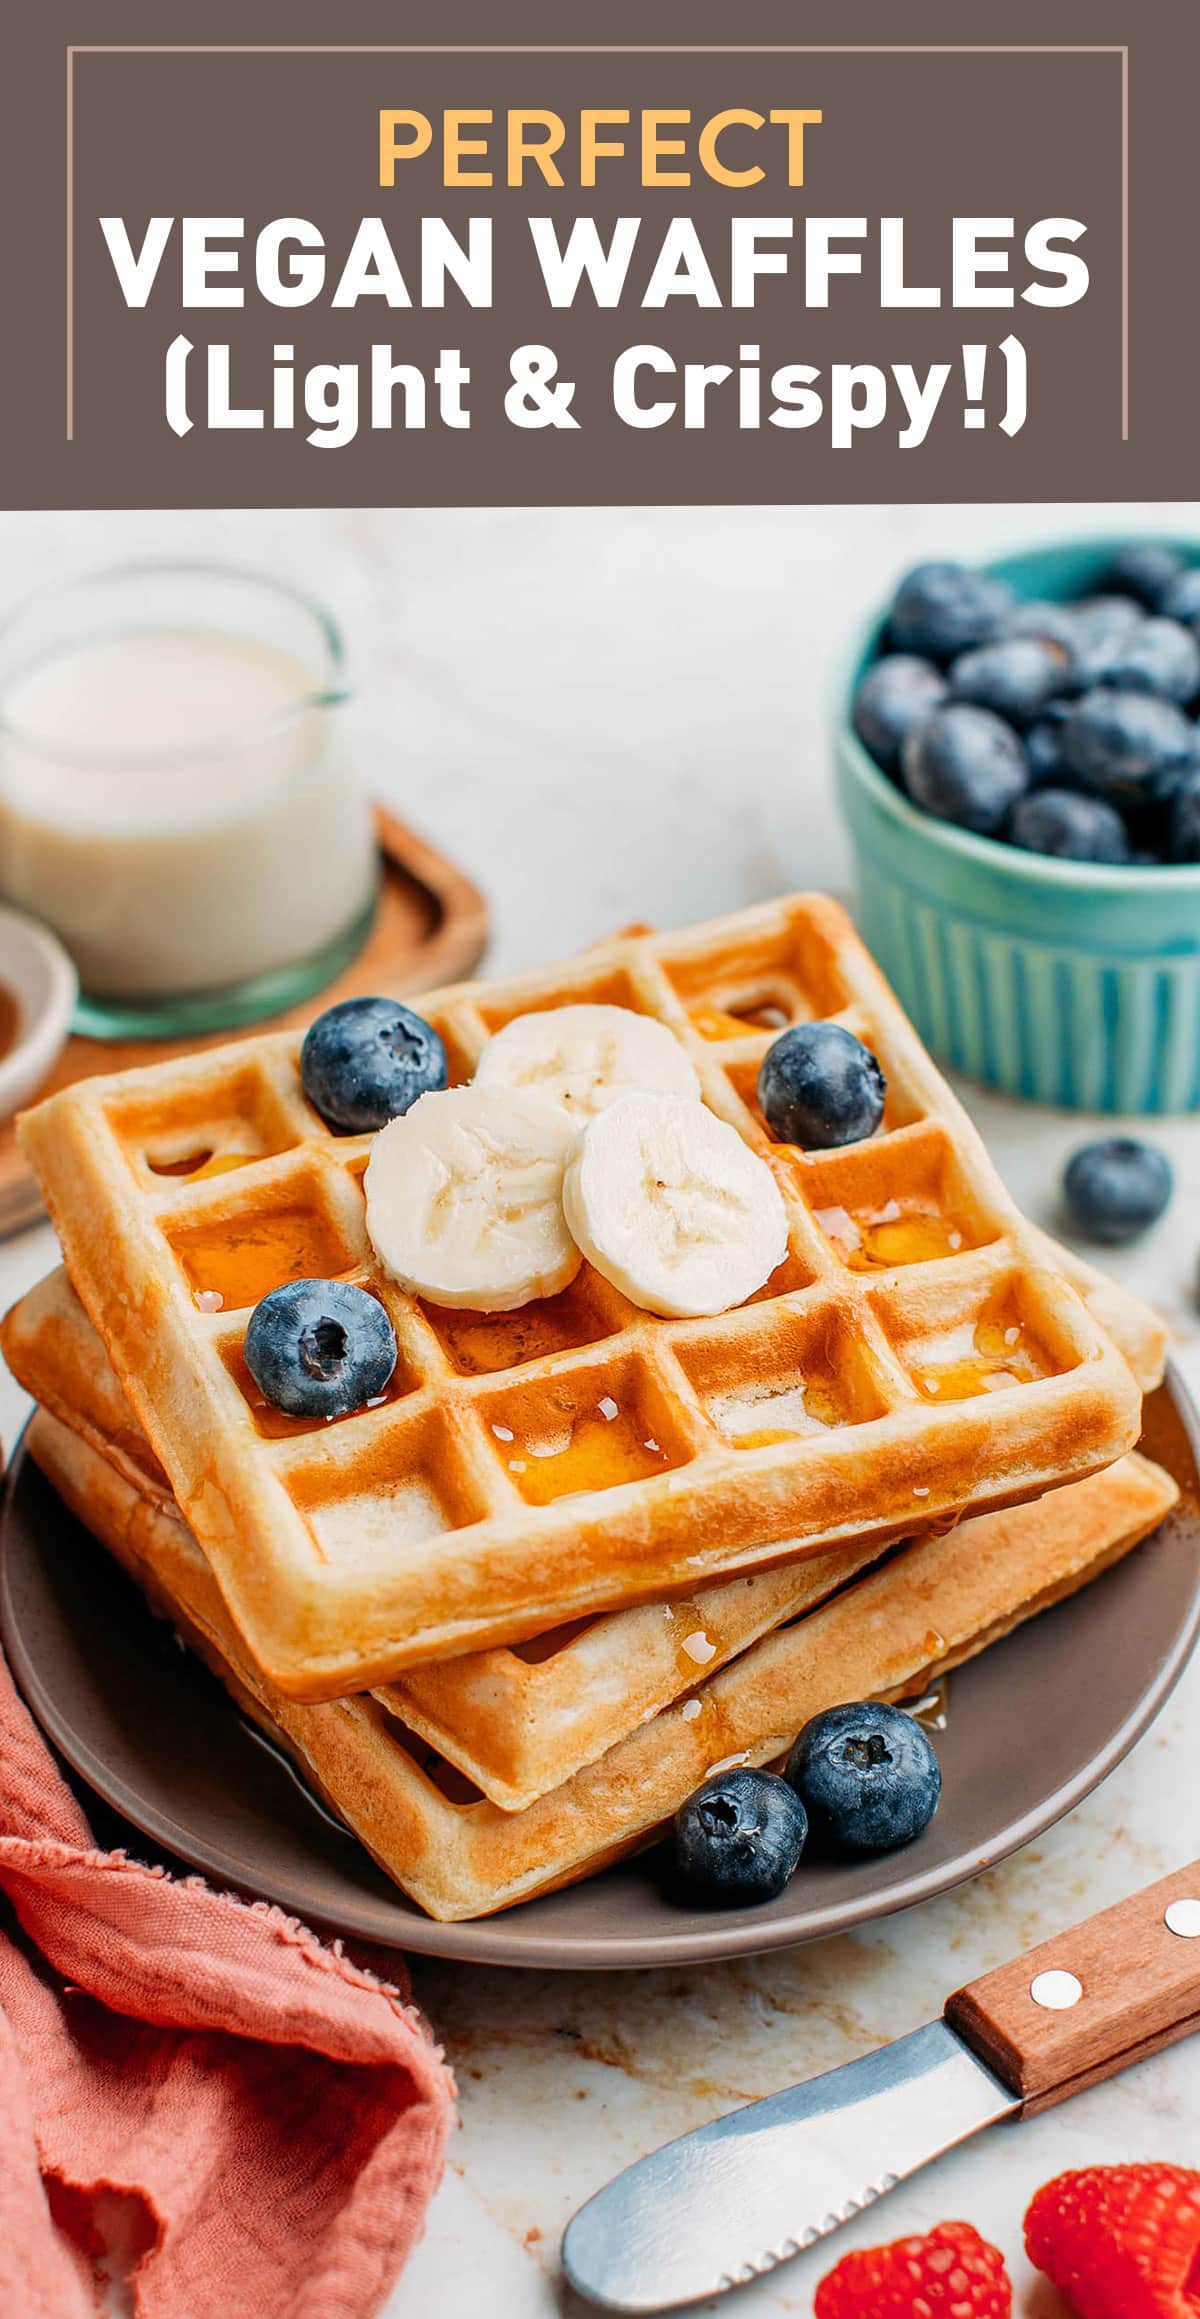 Made with only 7 simple and affordable plant-based ingredients, these vegan waffles are perfectly crispy on the outside and fluffy on the inside! Serve with fresh fruits and a generous drizzle of maple syrup for a fantastic breakfast! #waffles #vegan